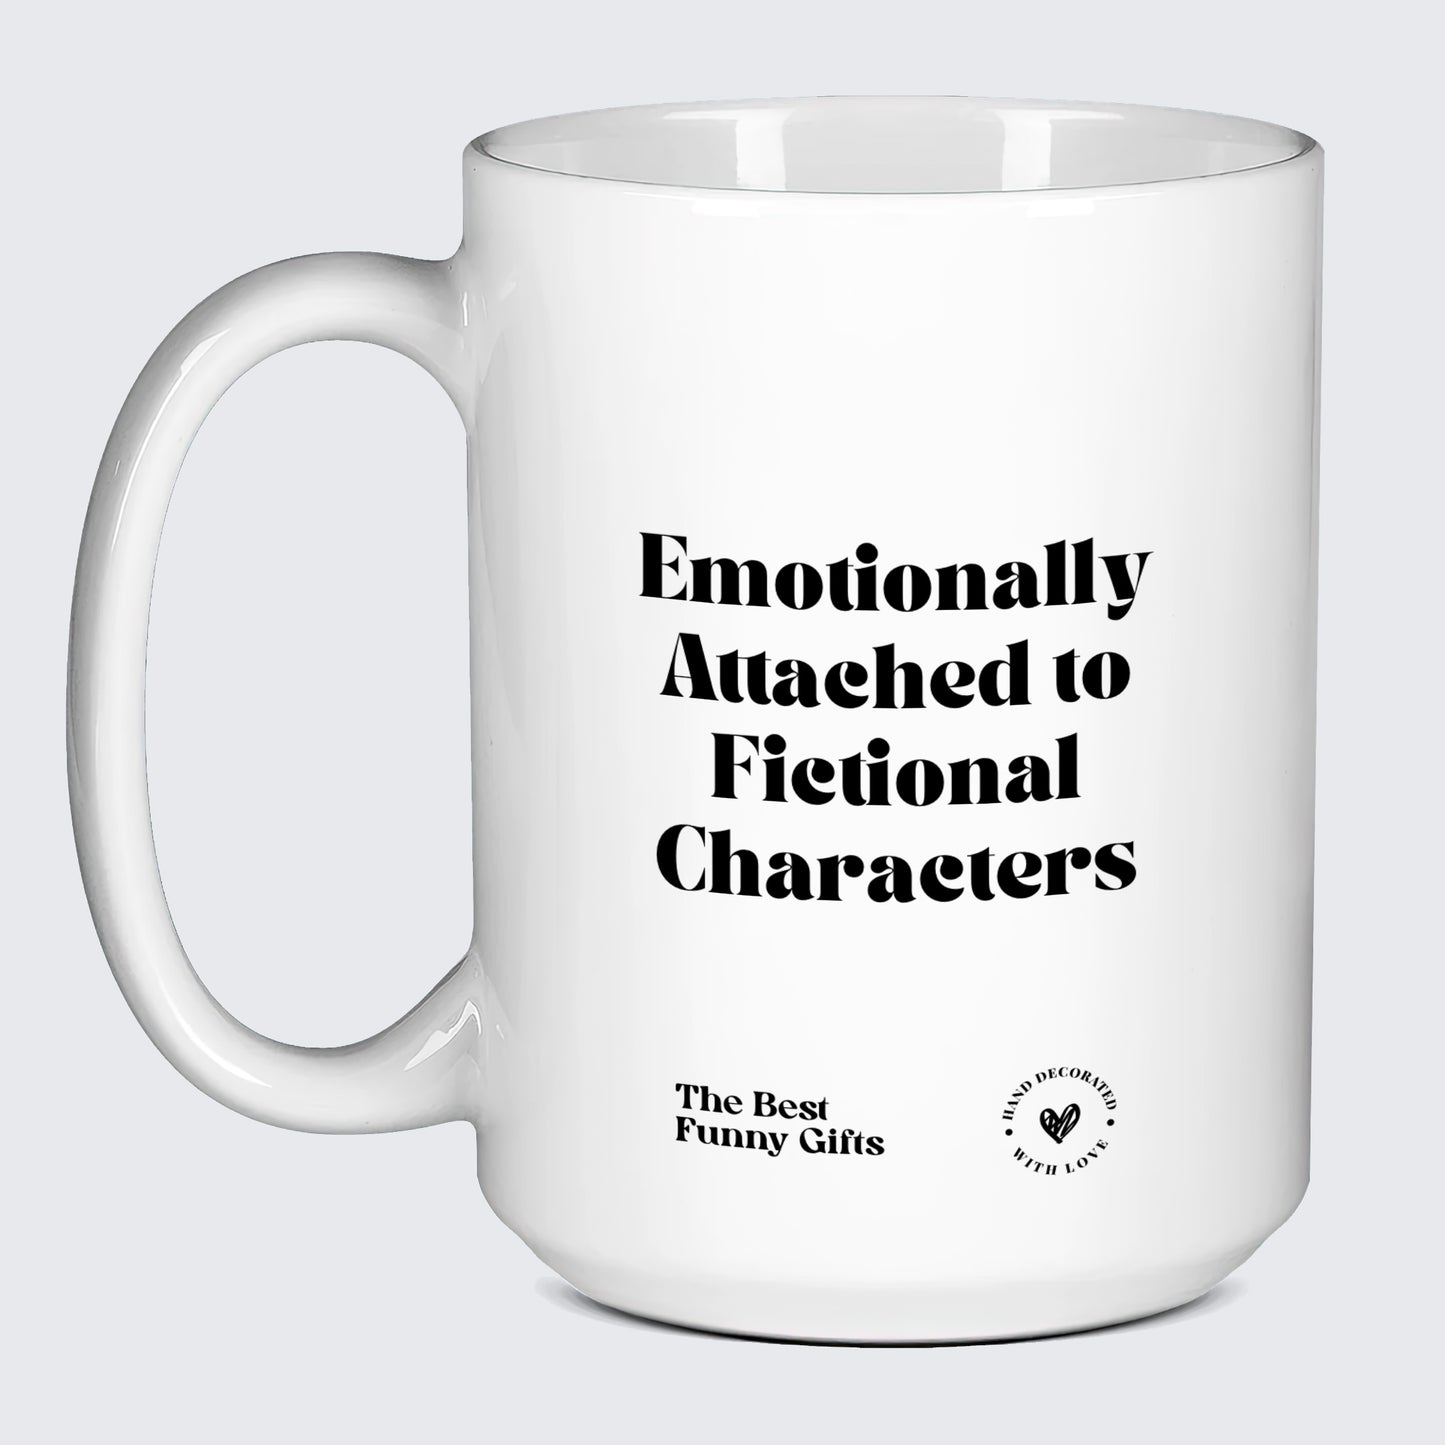 Cute Mugs Emotionally Attached to Fictional Characters - The Best Funny Gifts